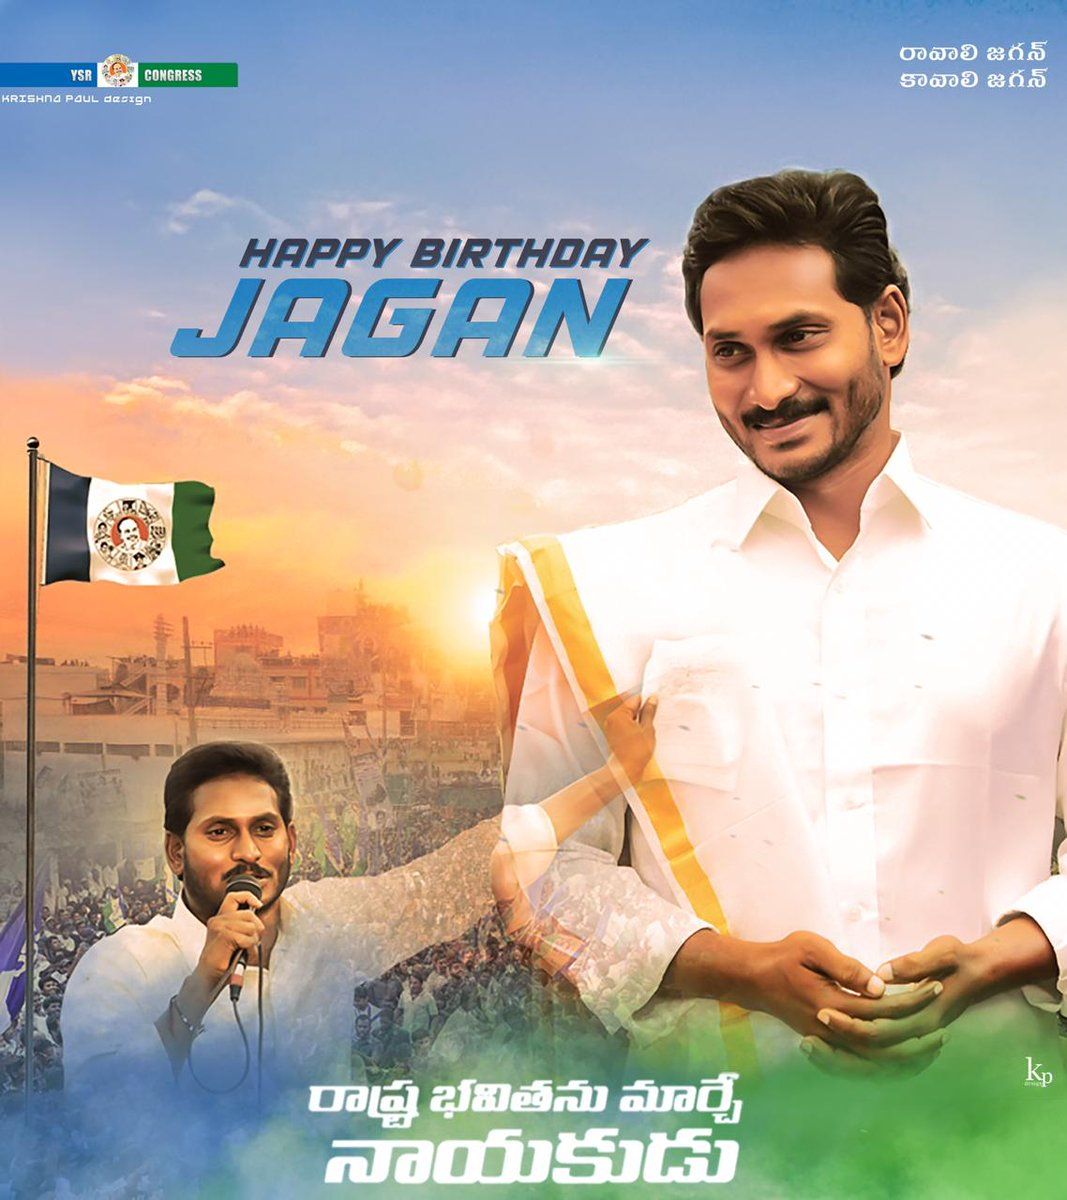 YS Jagan Live HD WallpapersAmazoncomAppstore for Android